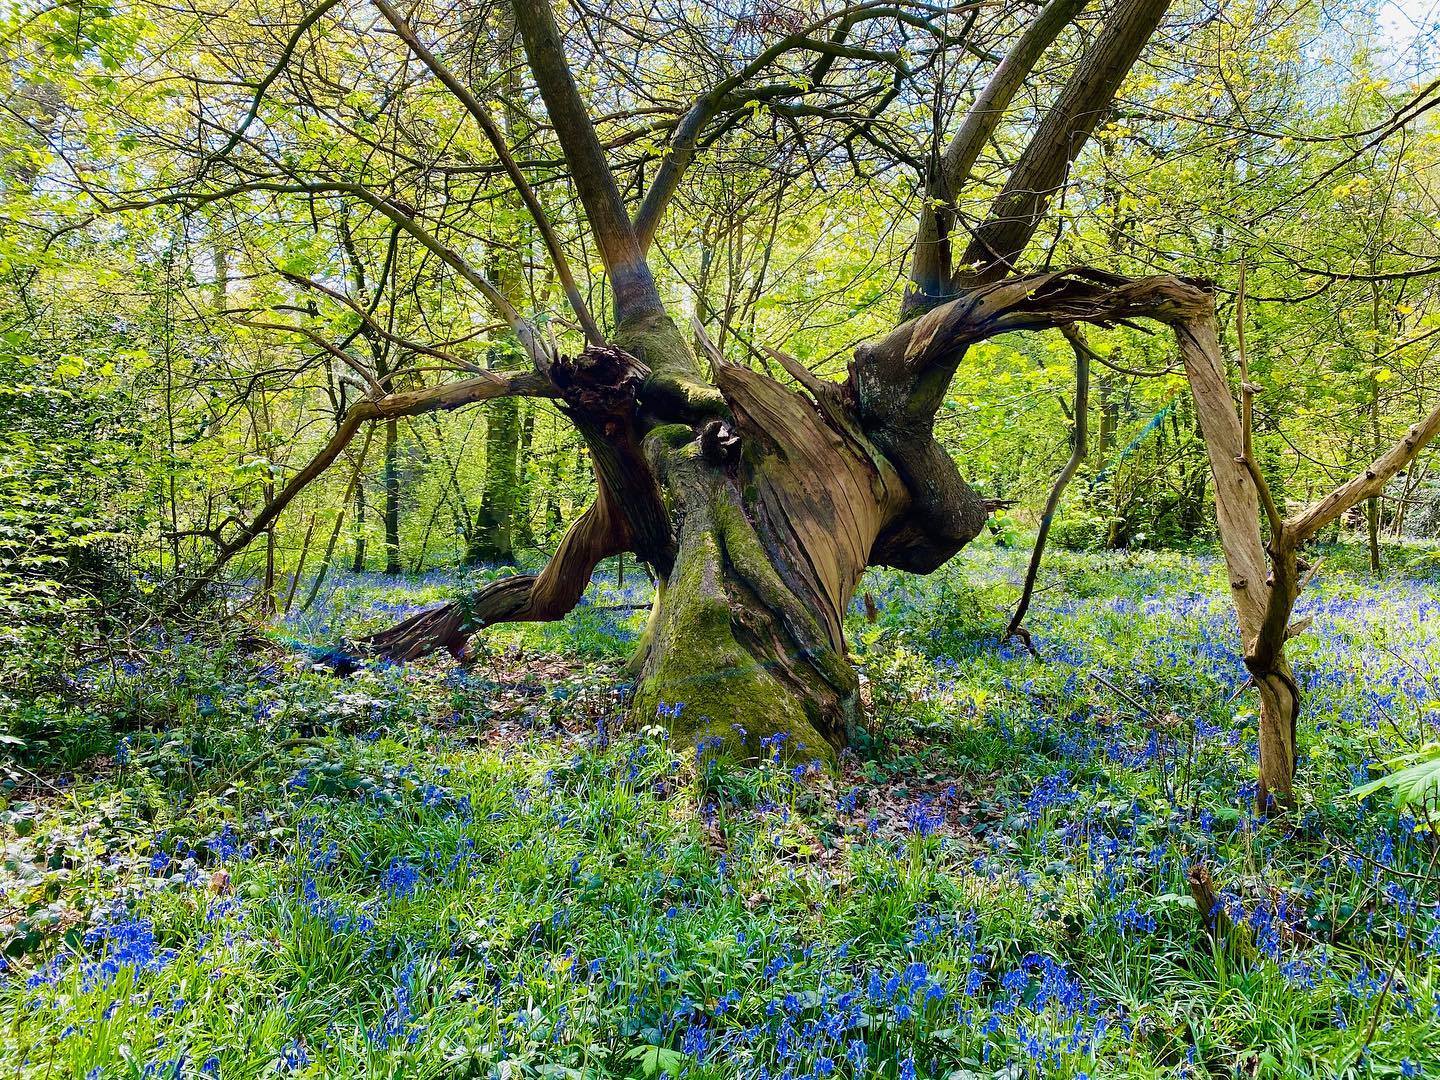 Combermere’s Wildly Popular Bluebell Walks and House Tours Return